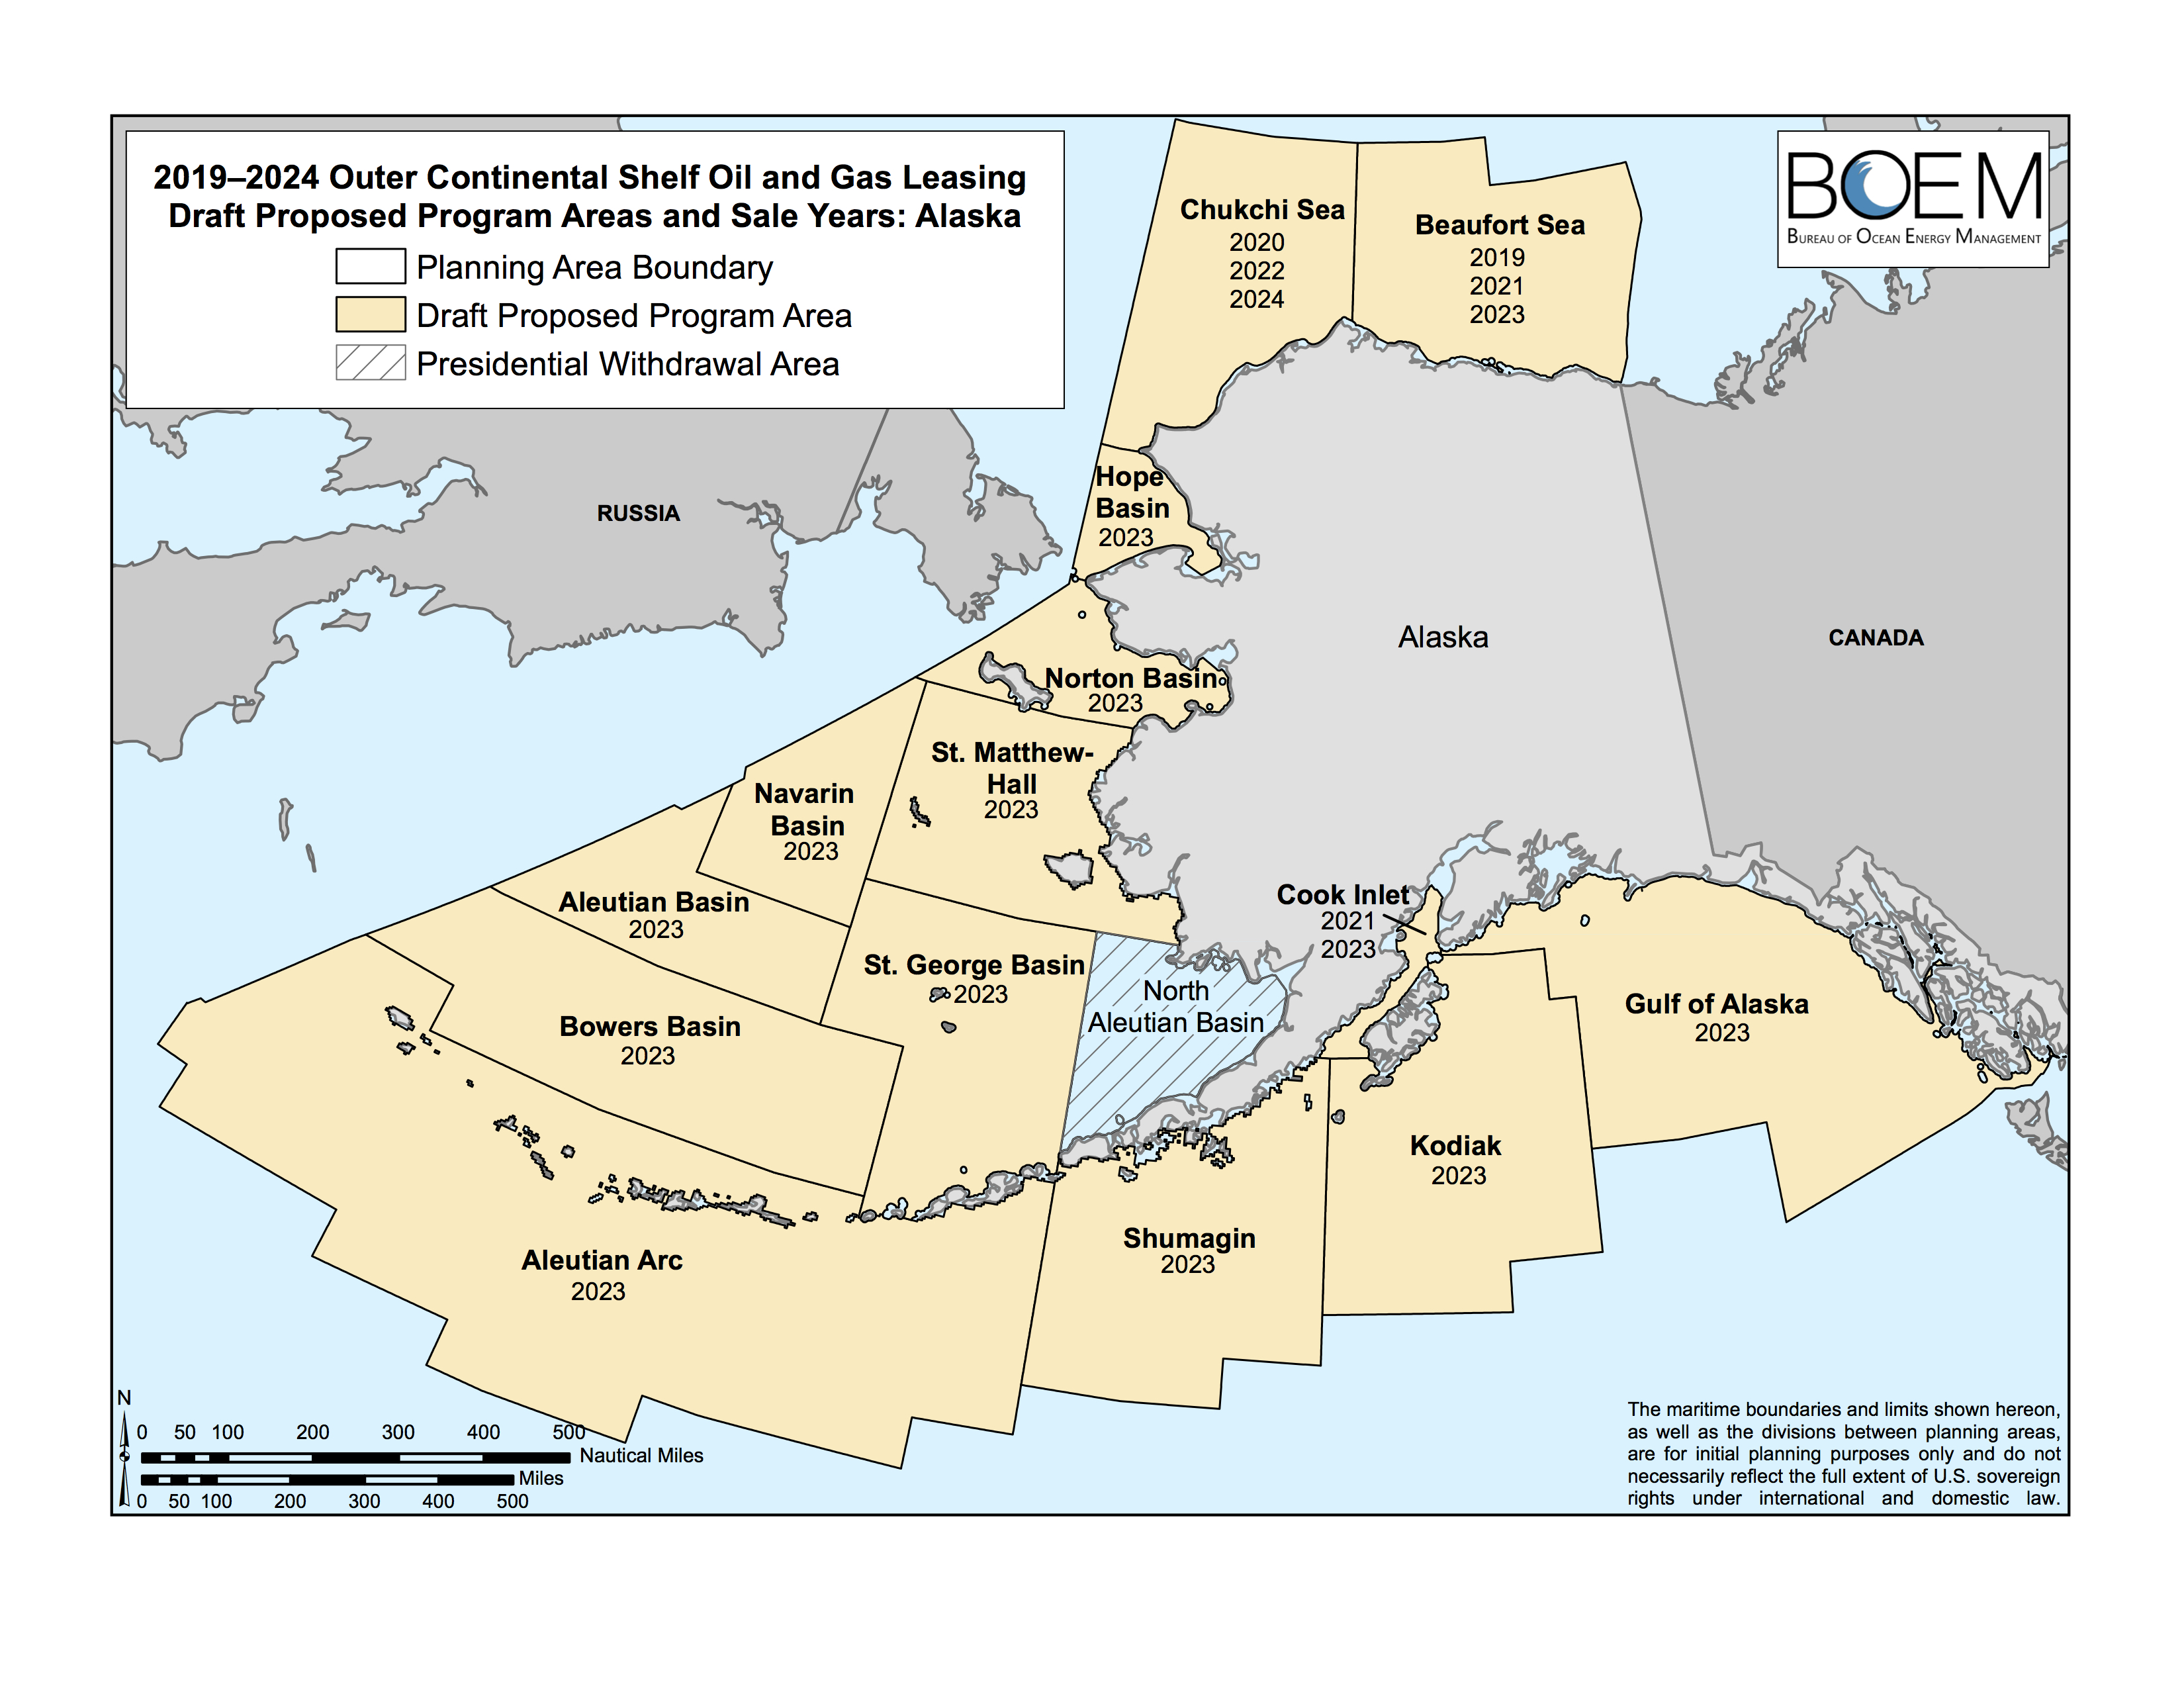 The Trump Administration's draft proposed plan seeks to hold oil and gas lease sales in nearly every Alaska basin, including some that have never had a lease sale before. (BOEM)